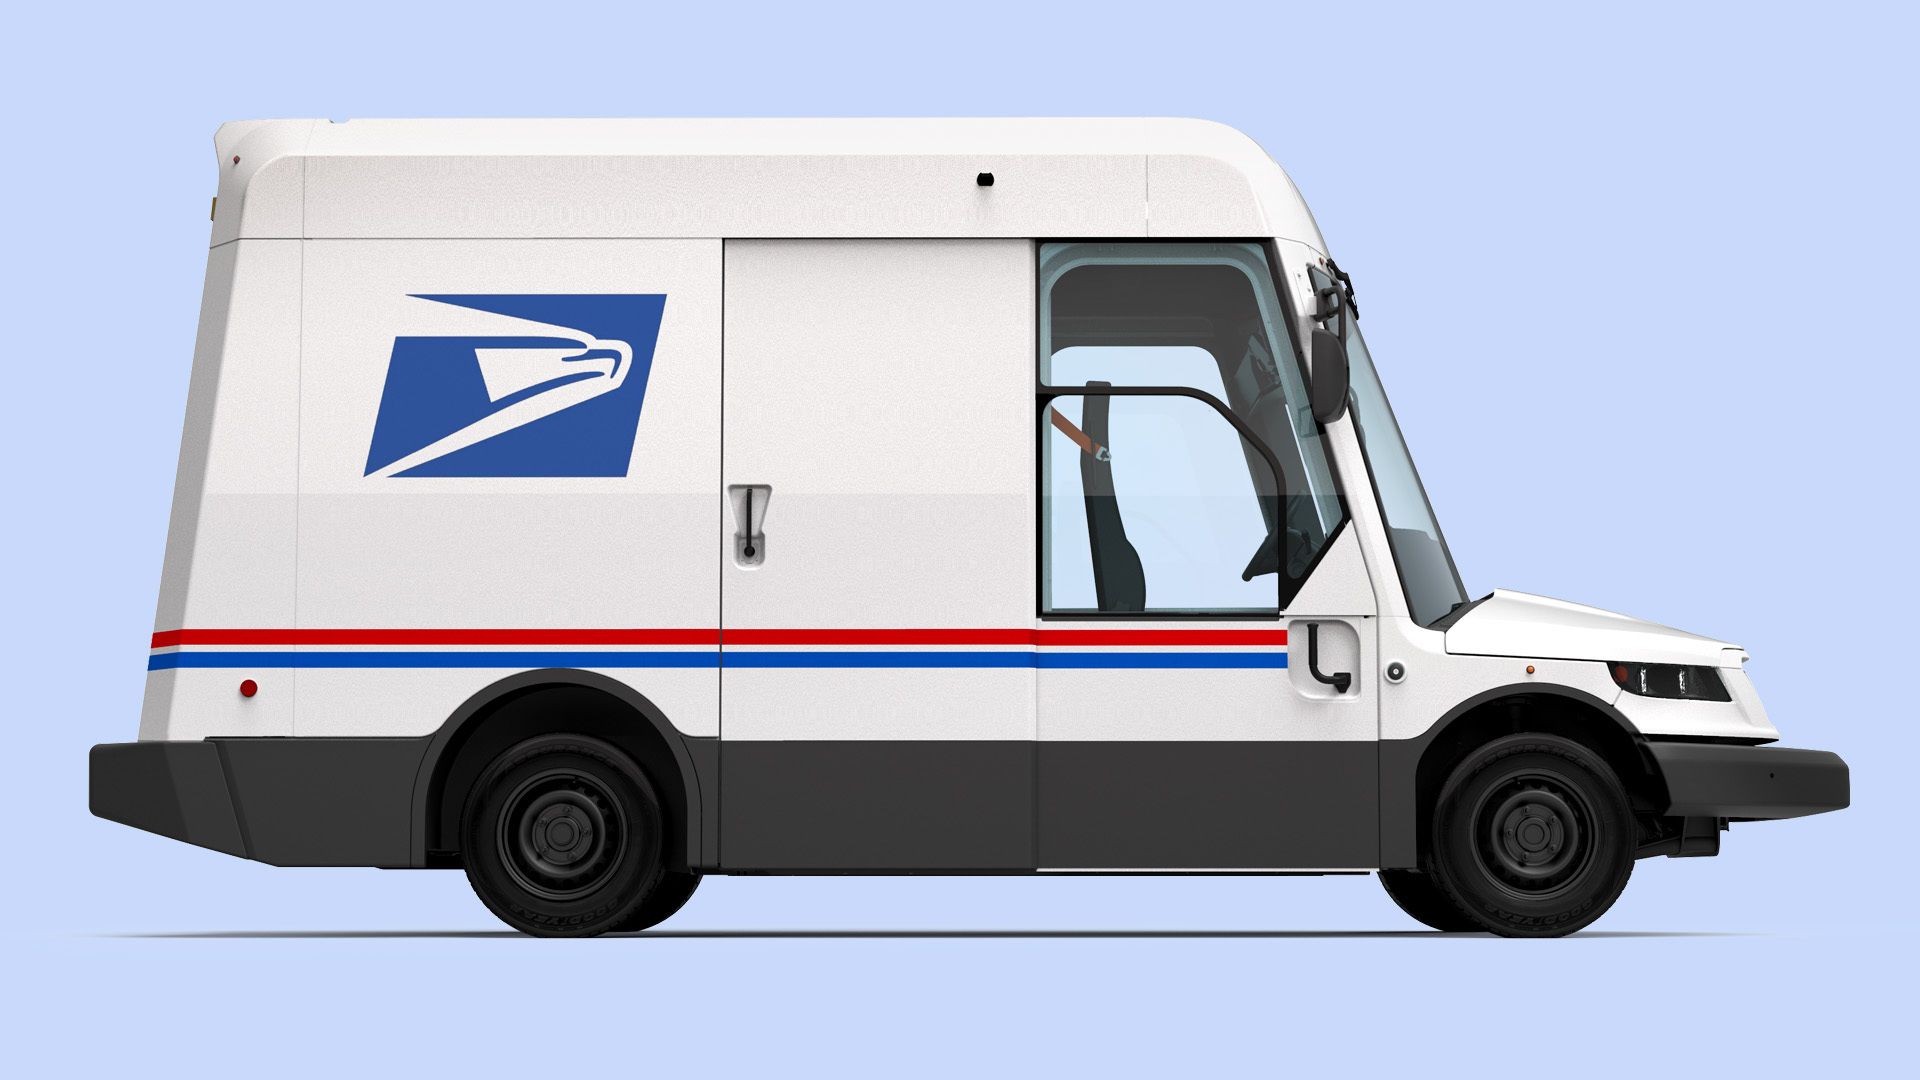 Image of the US Postal Service's next-generation delivery truck, coming soon